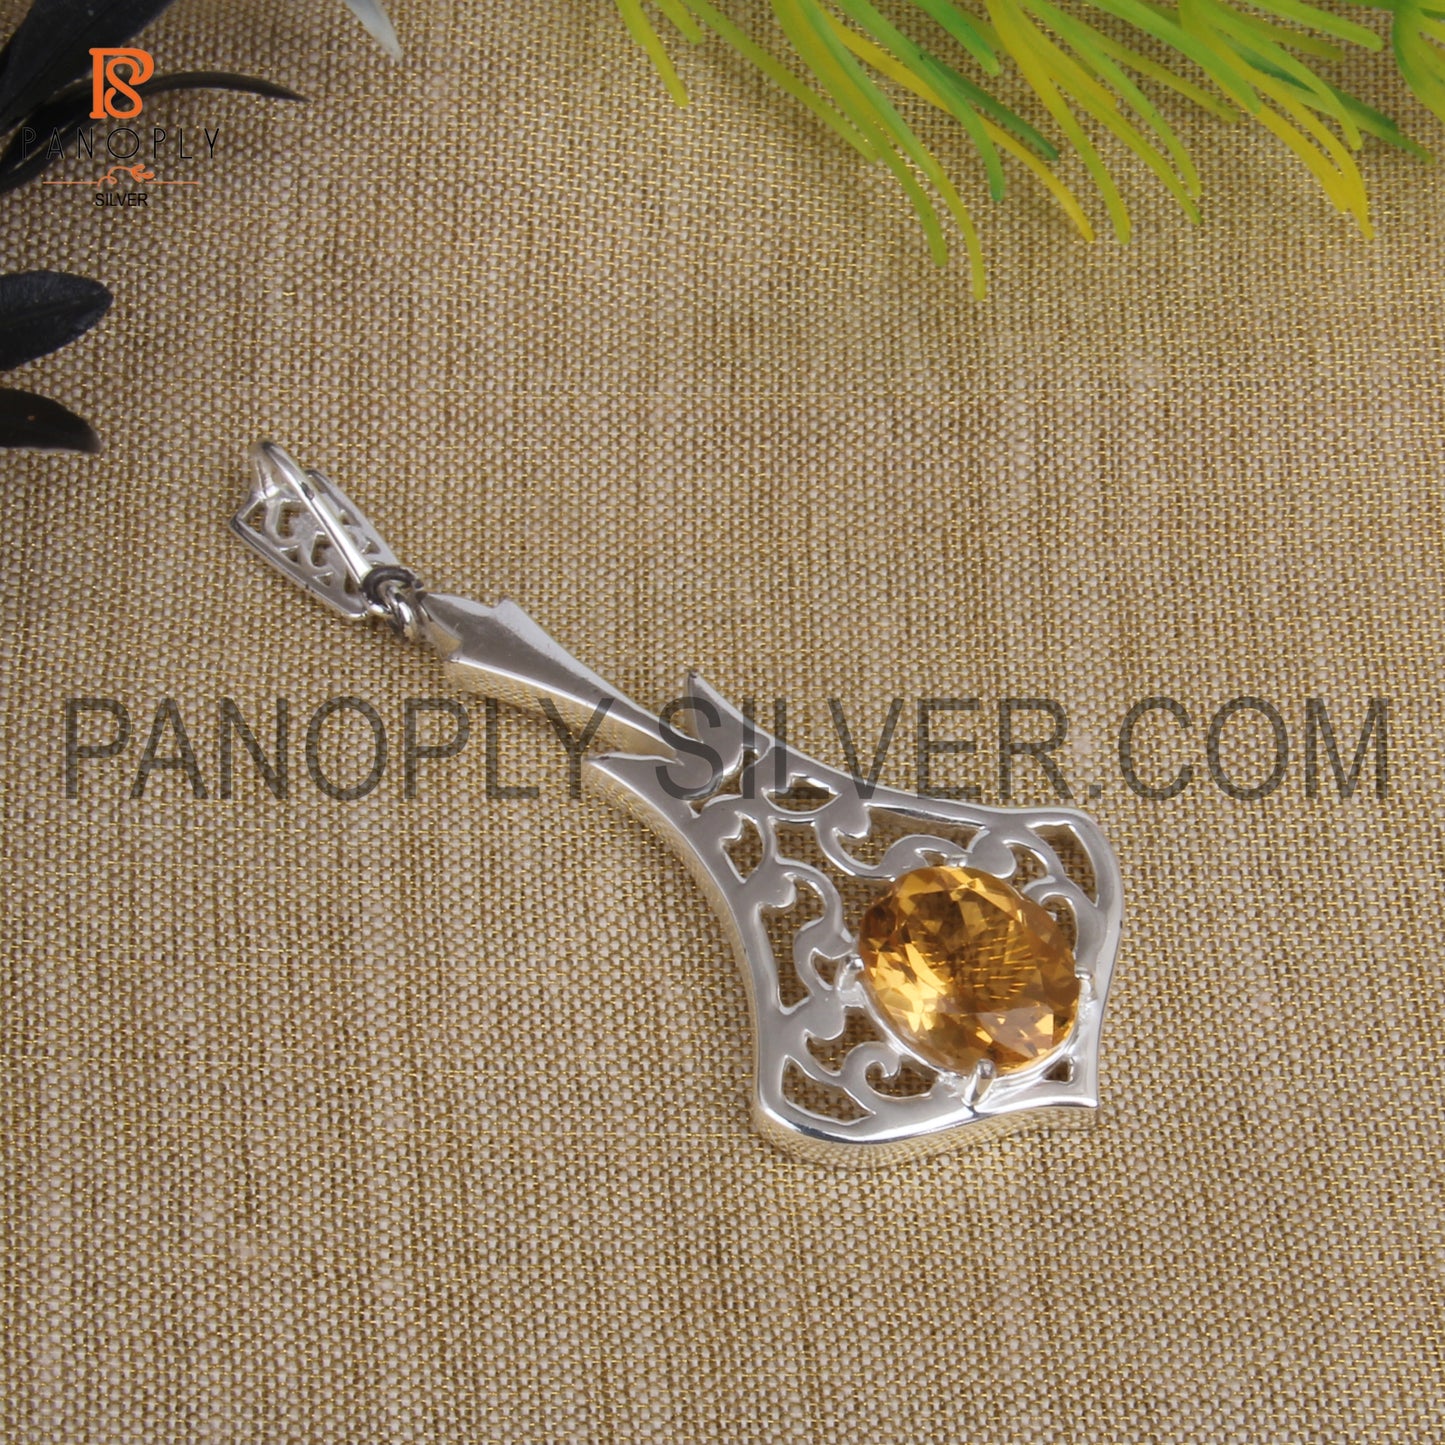 925 Quality Silver Citrine Gemstone Silver Pendant For Women's